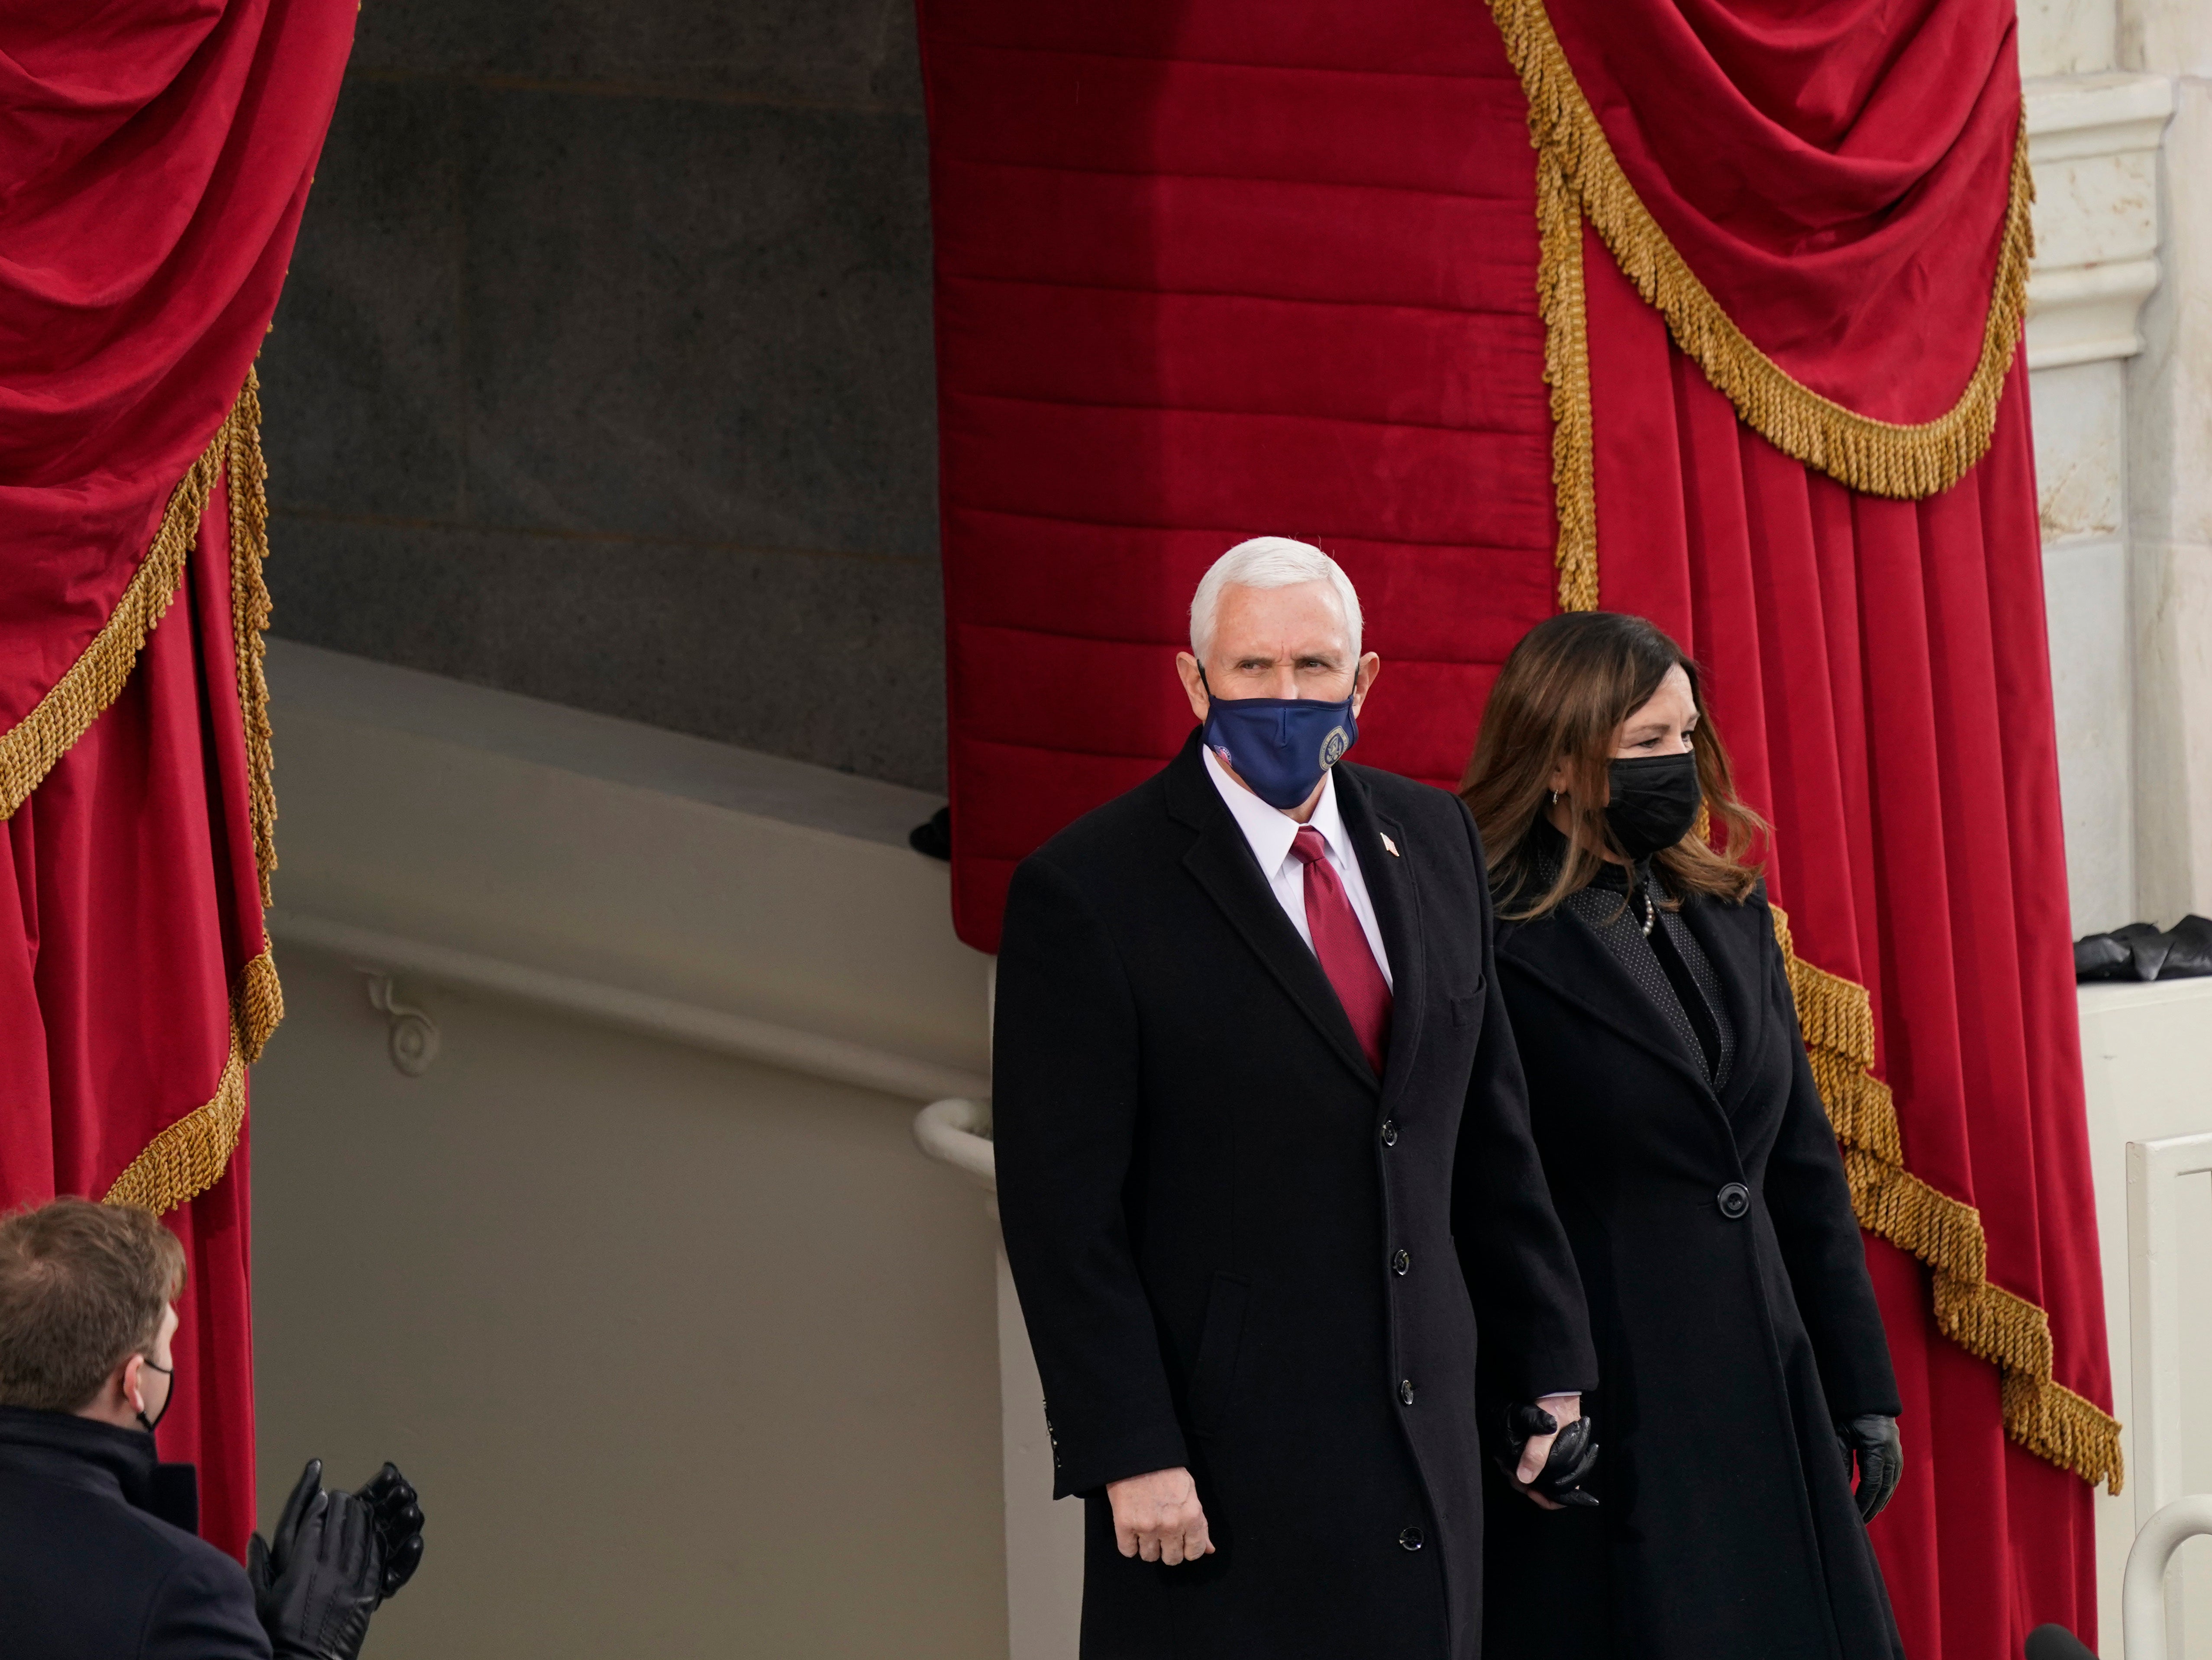 Vice President Mike Pence and Karen Pence arrive at the inauguration of Joe Biden on the West Front of the US Capitol. Mr Pence is attending the inauguration ceremony despite the absence of President Donald Trump, who left Washington before the ceremony began